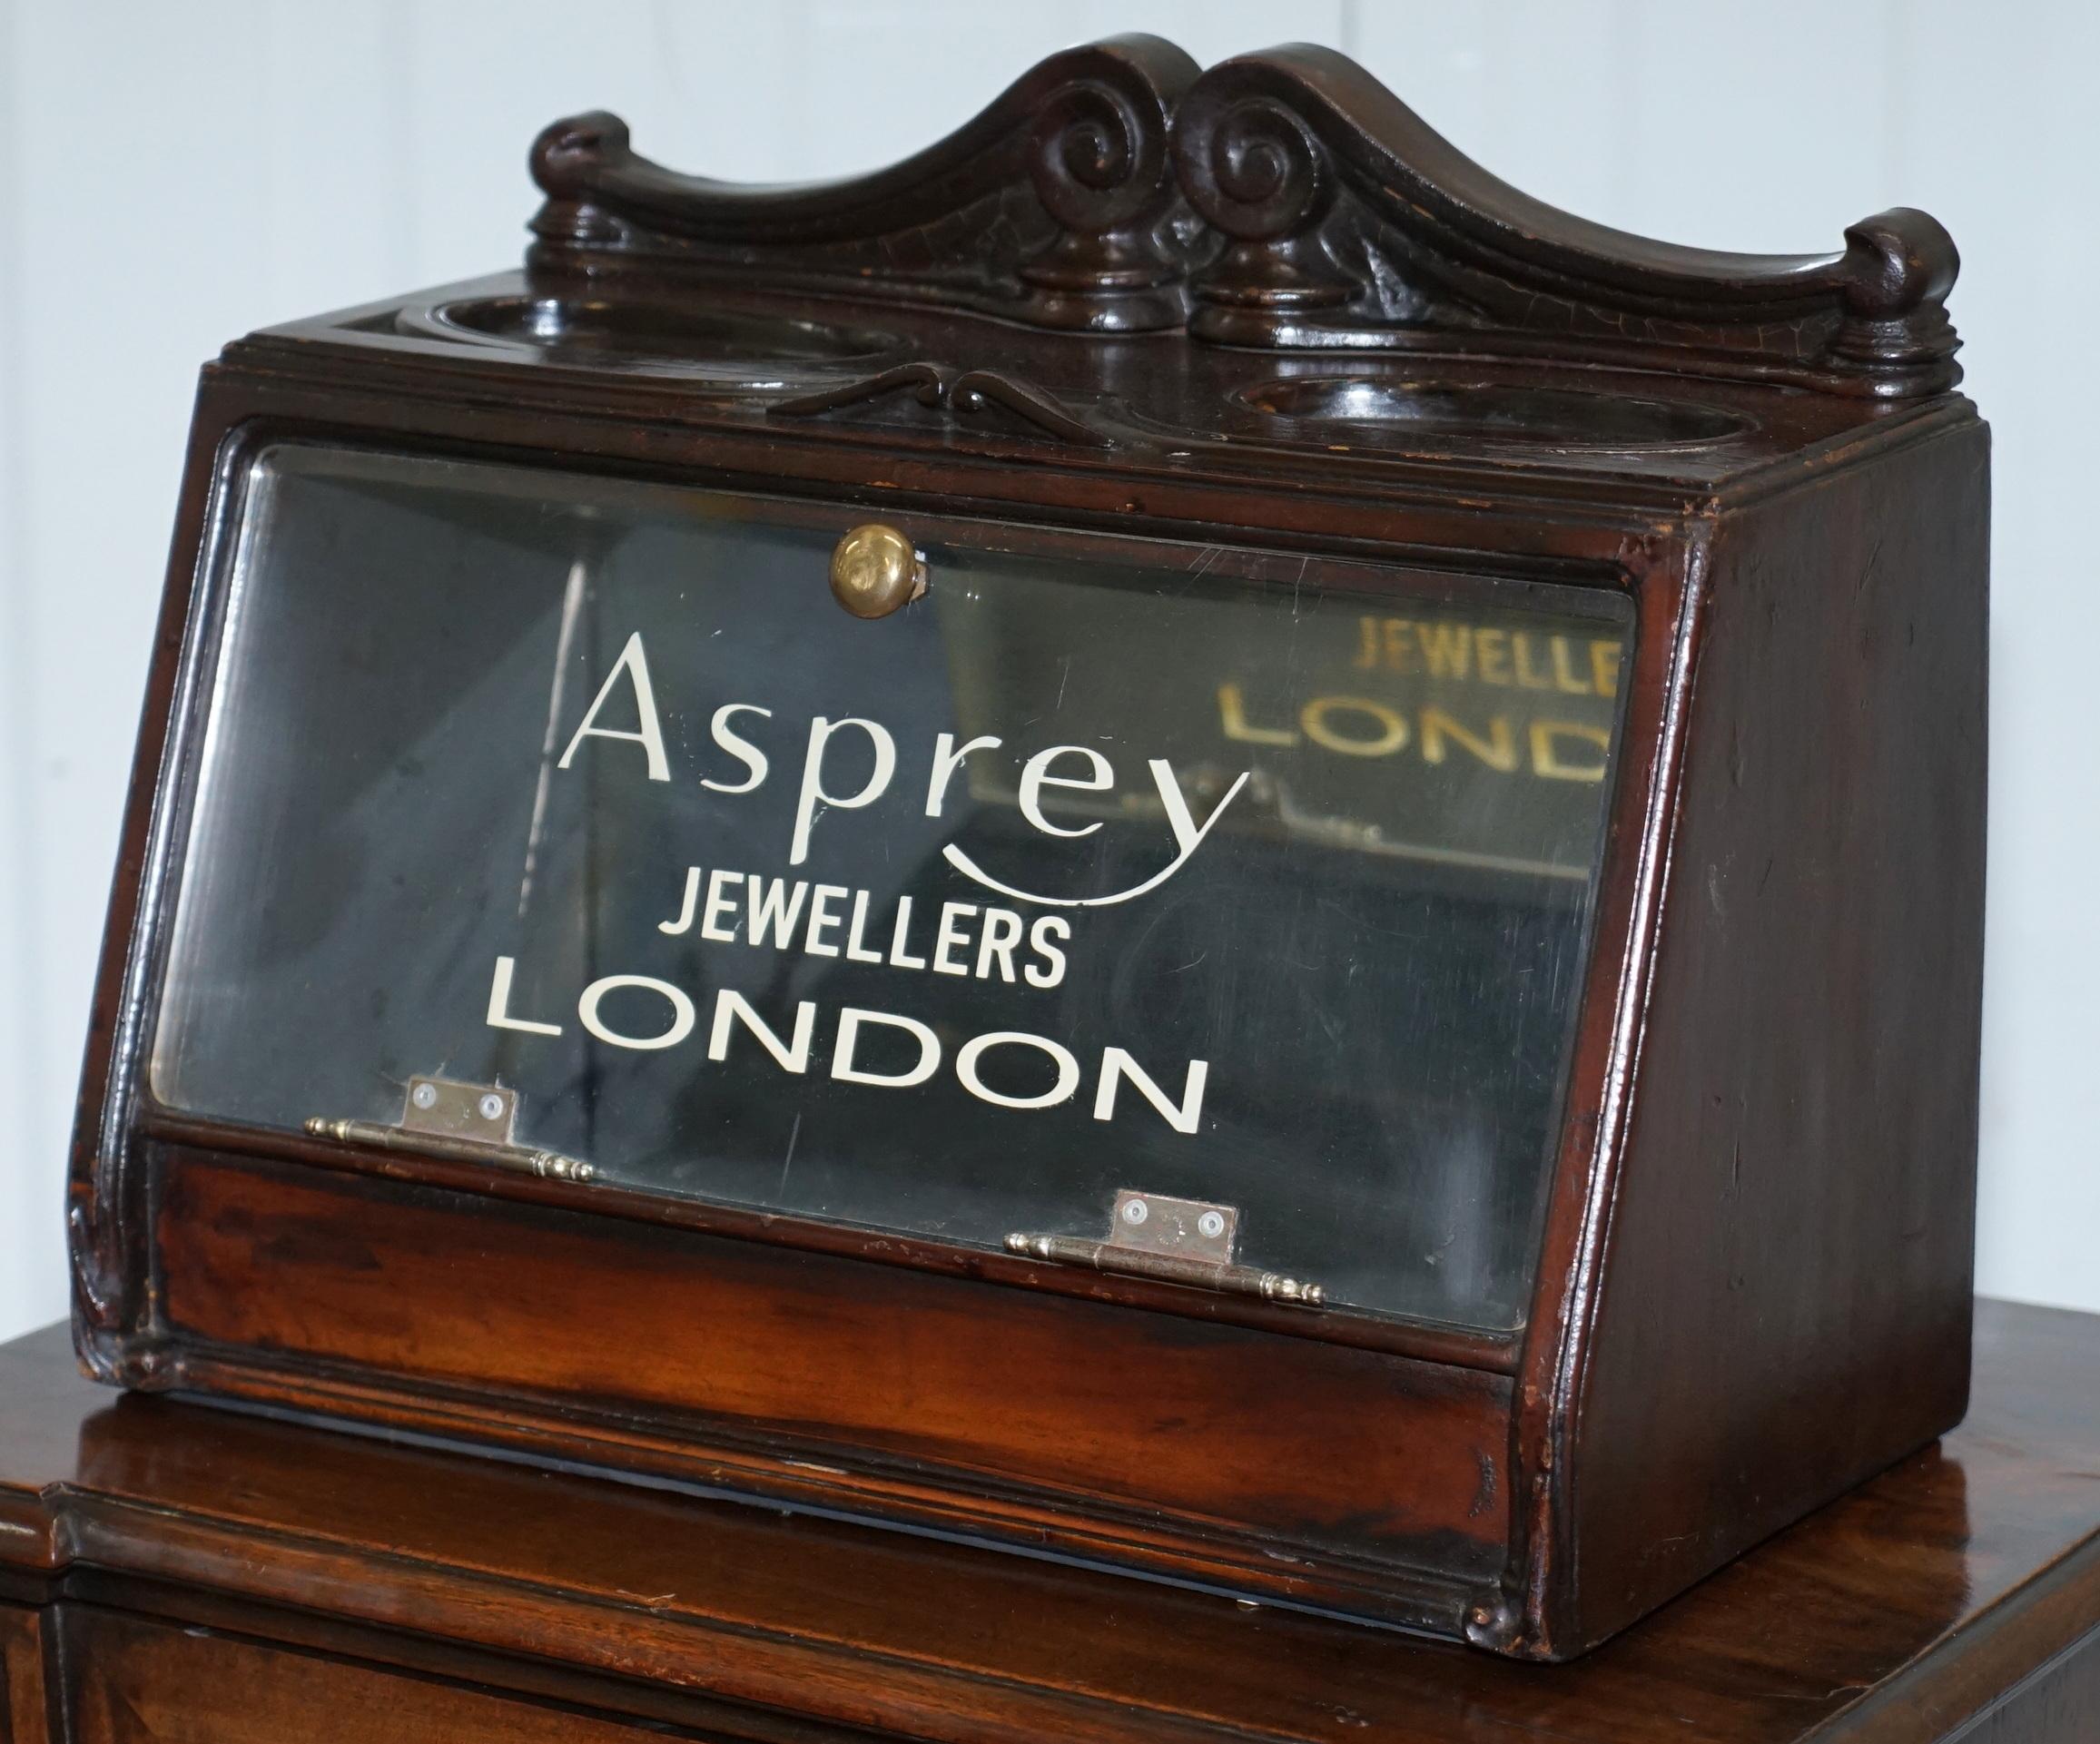 We are delighted to offer for sale this stunning mirrored back Asprey London Jewellers display case

A very good looking and well made display cabinet from one of the greatest jewellers and silver smiths England has ever known

Haberdashery and